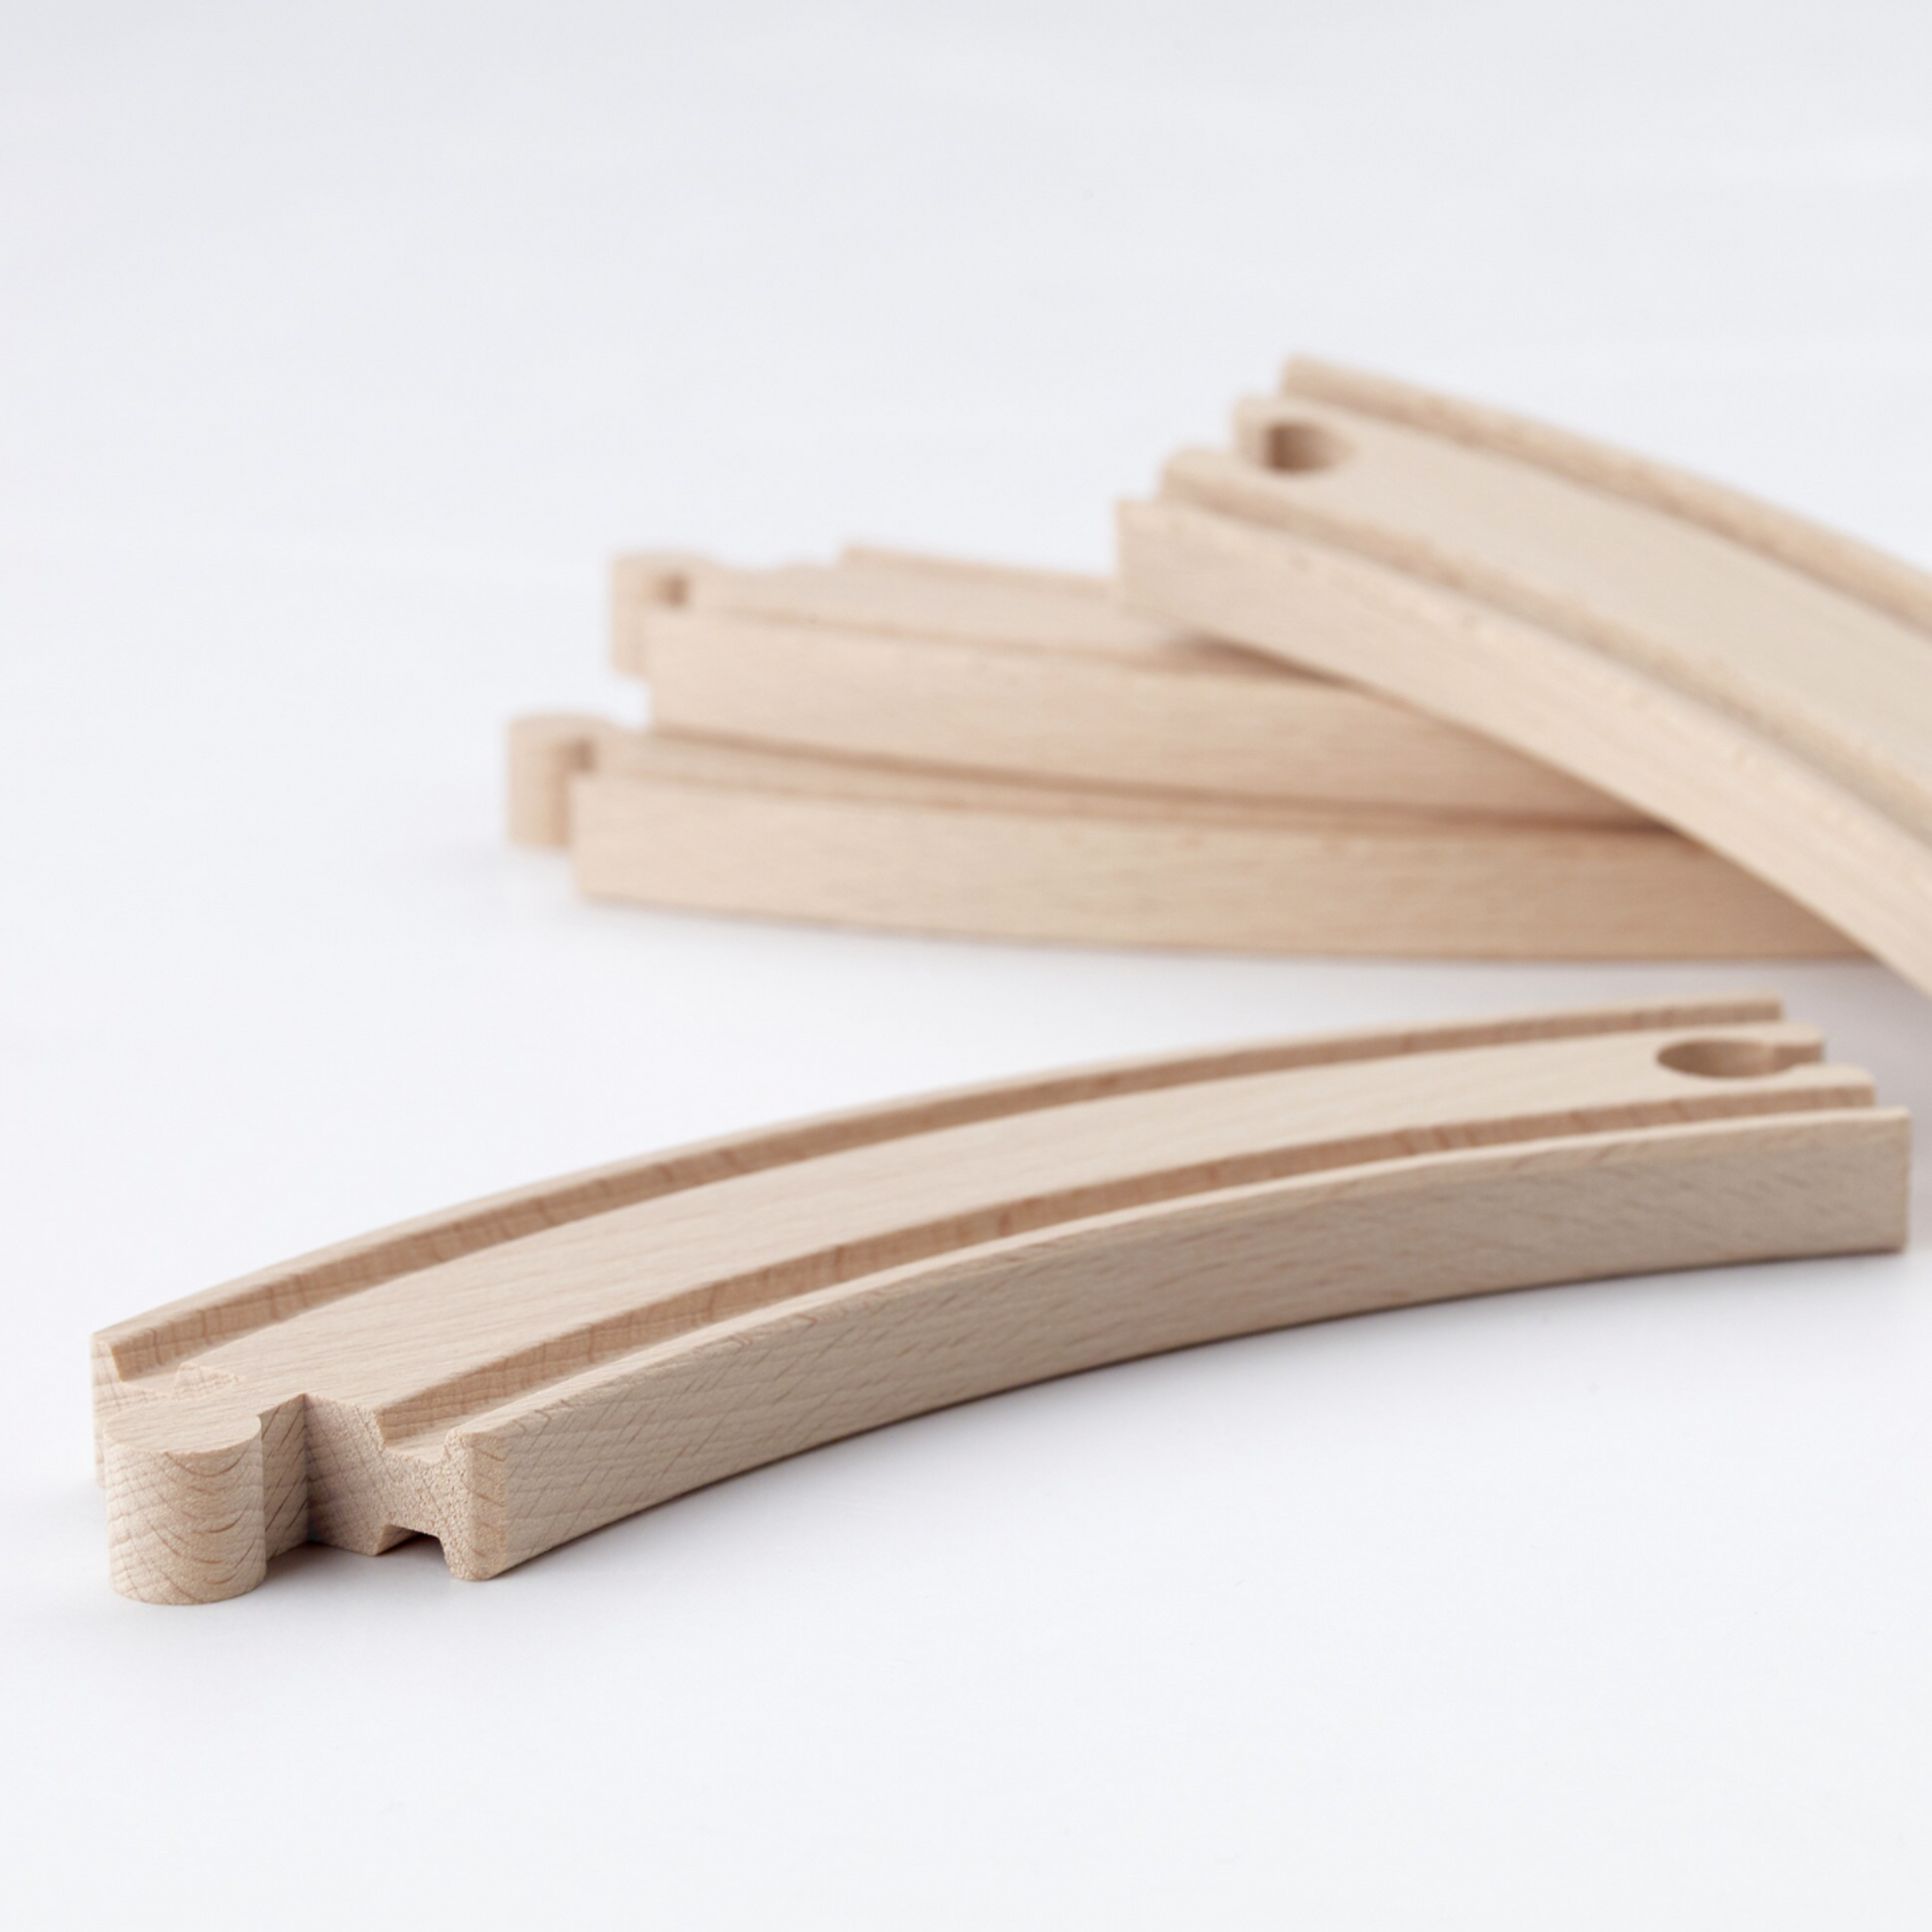 IKEA Lillabo Railway Track Extensions, 10-Pack (4620768739393)